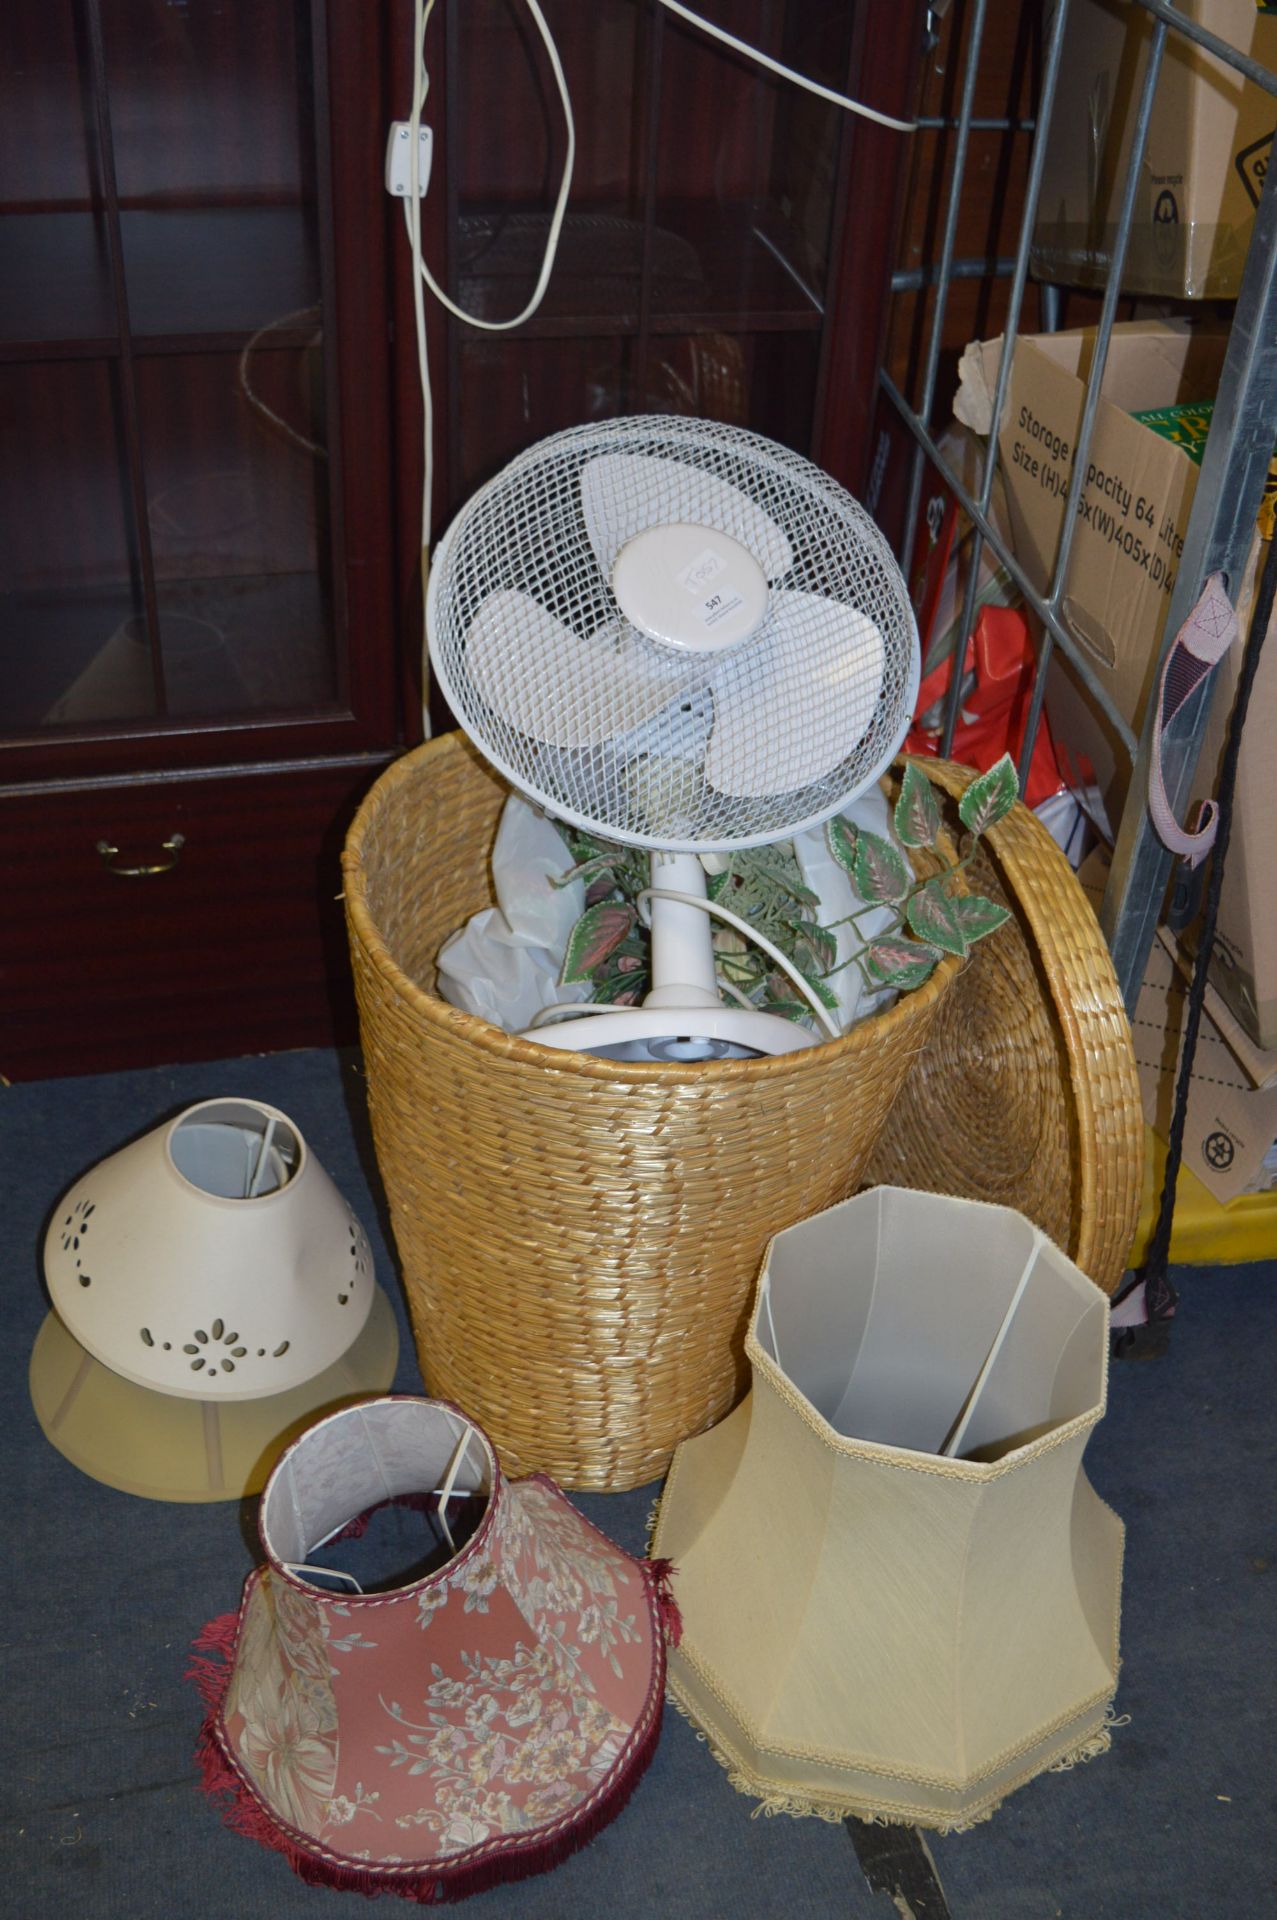 Desktop Fan and a Laundry Basket Containing Lampsh